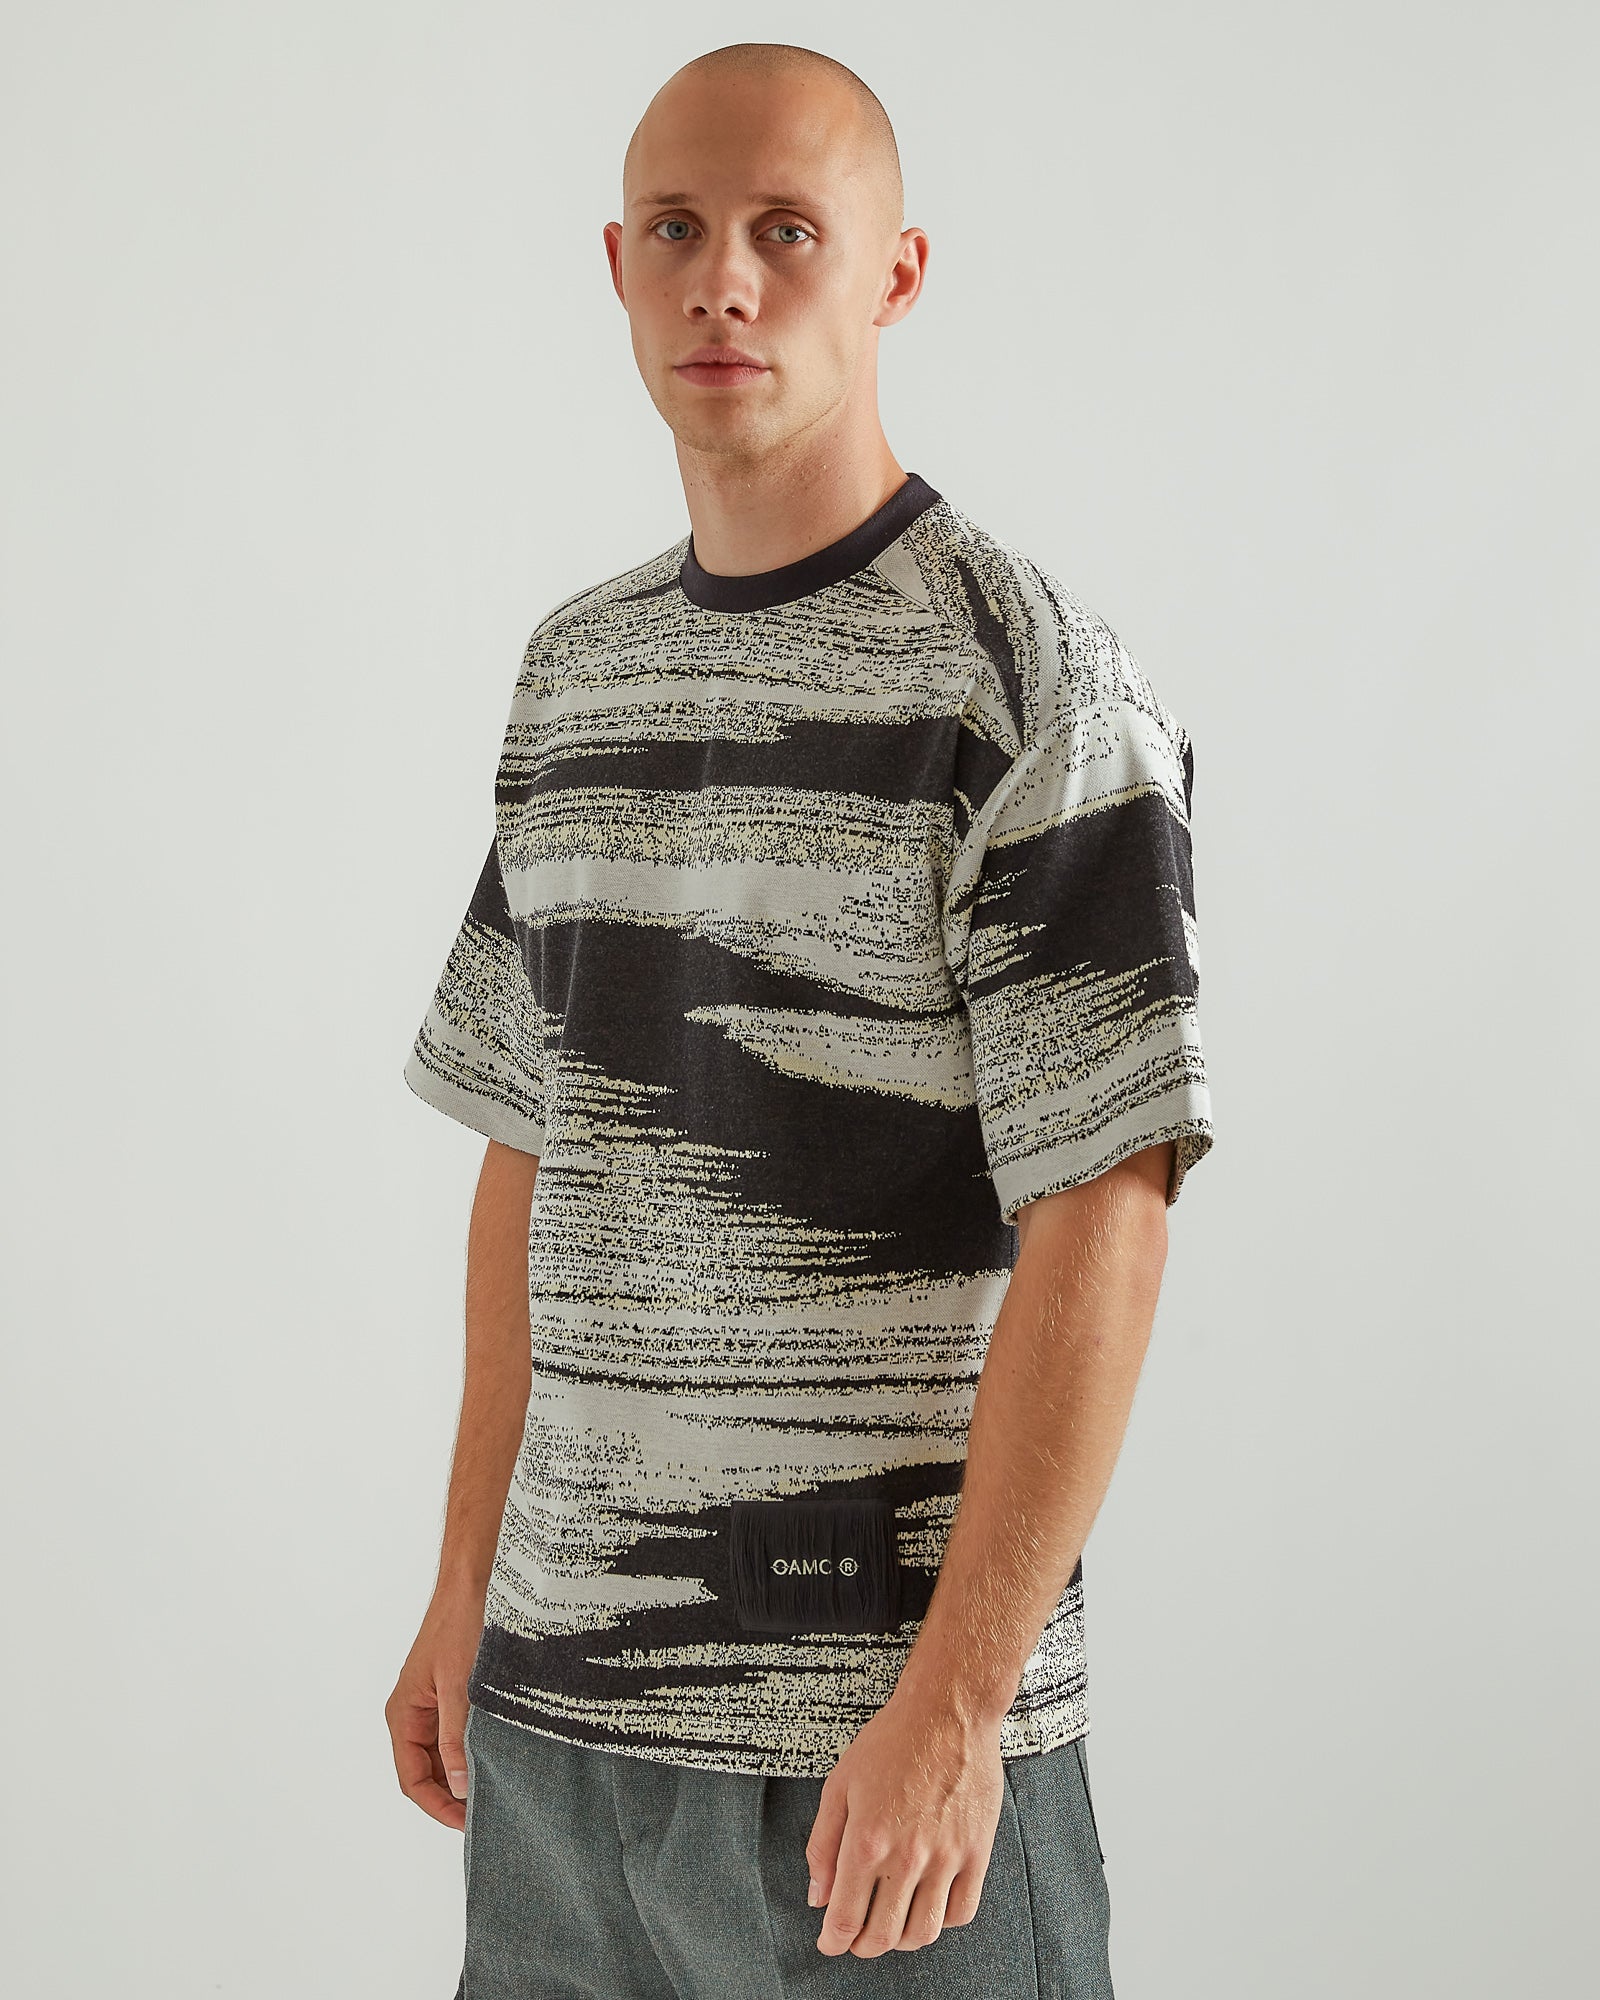 Noise S/S T-Shirt in Off White